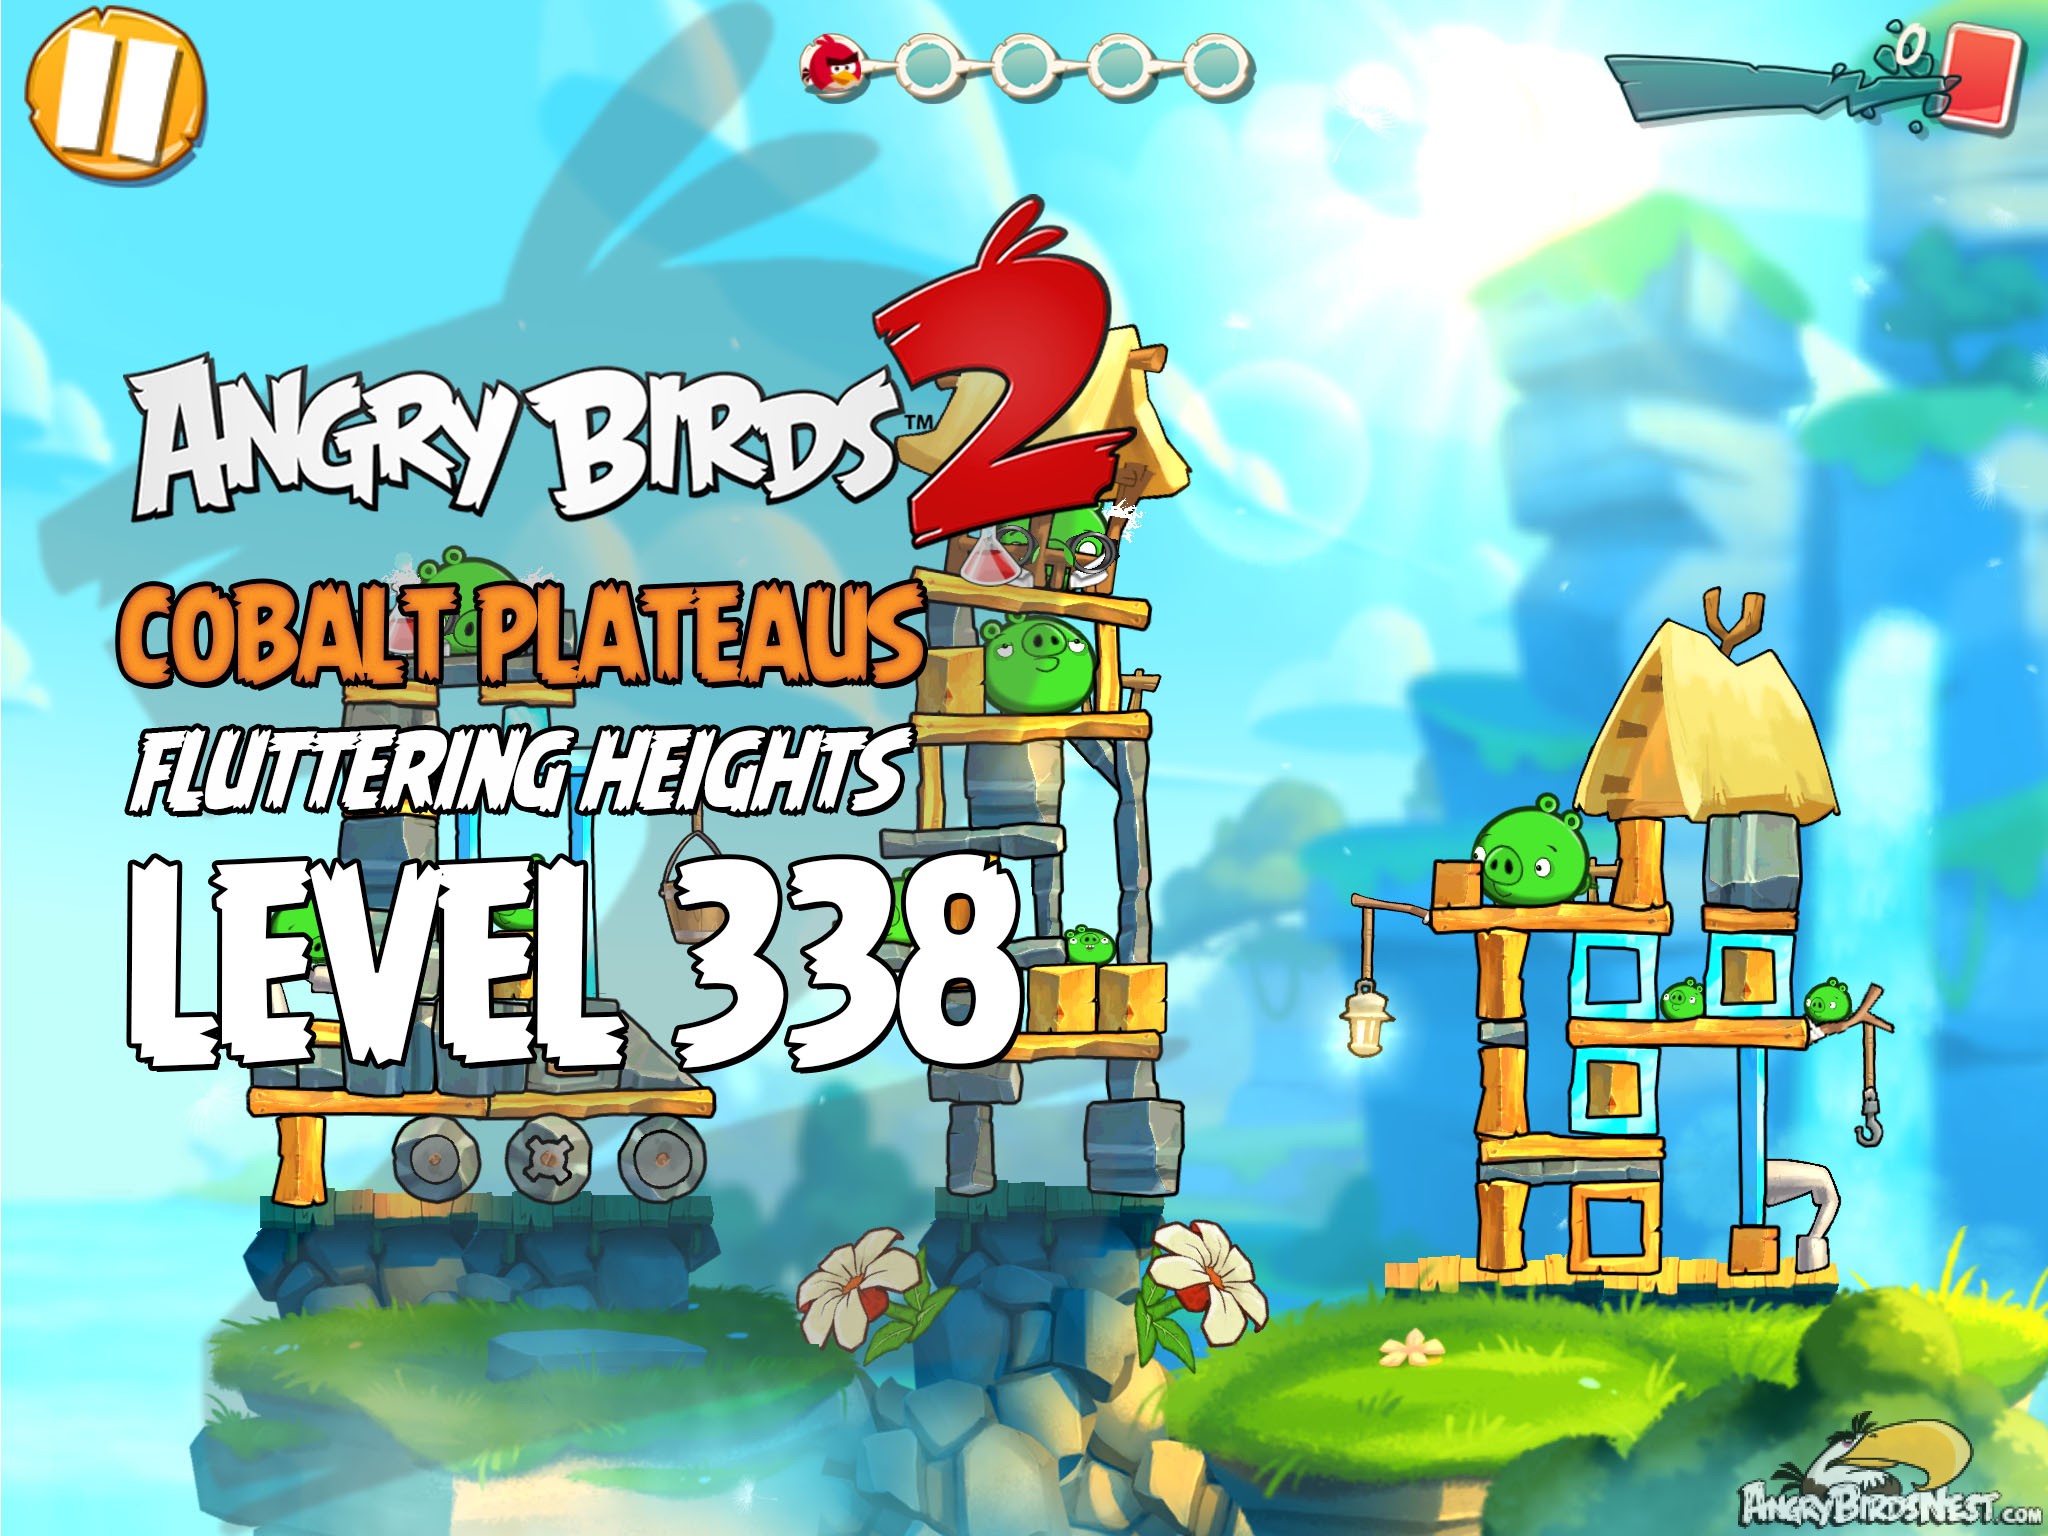 Angry Birds 2 Level 338 Cobalt Plateaus Fluttering Heights Image